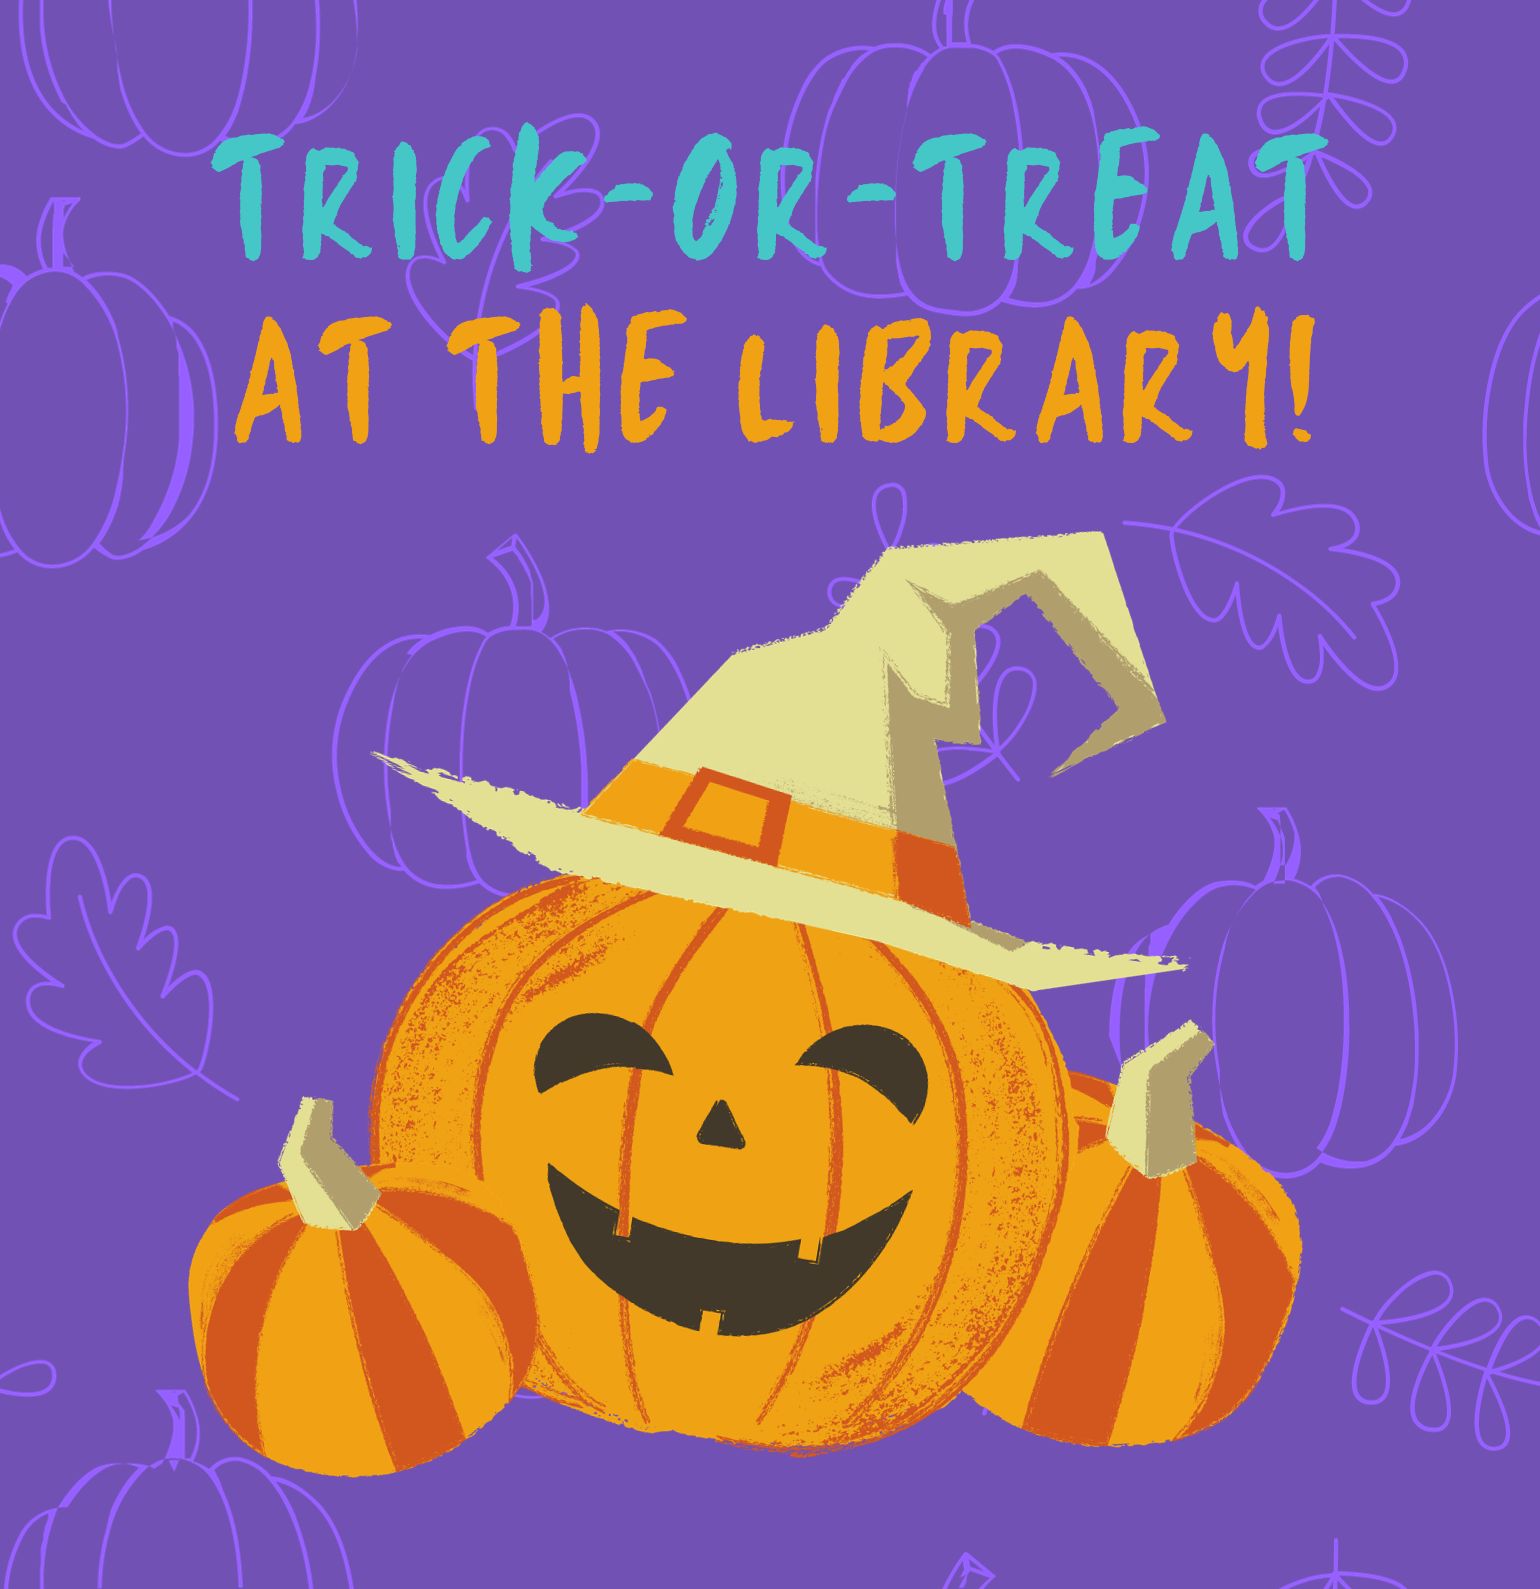 TrickorTreat at the Library Mukwonago Community Library